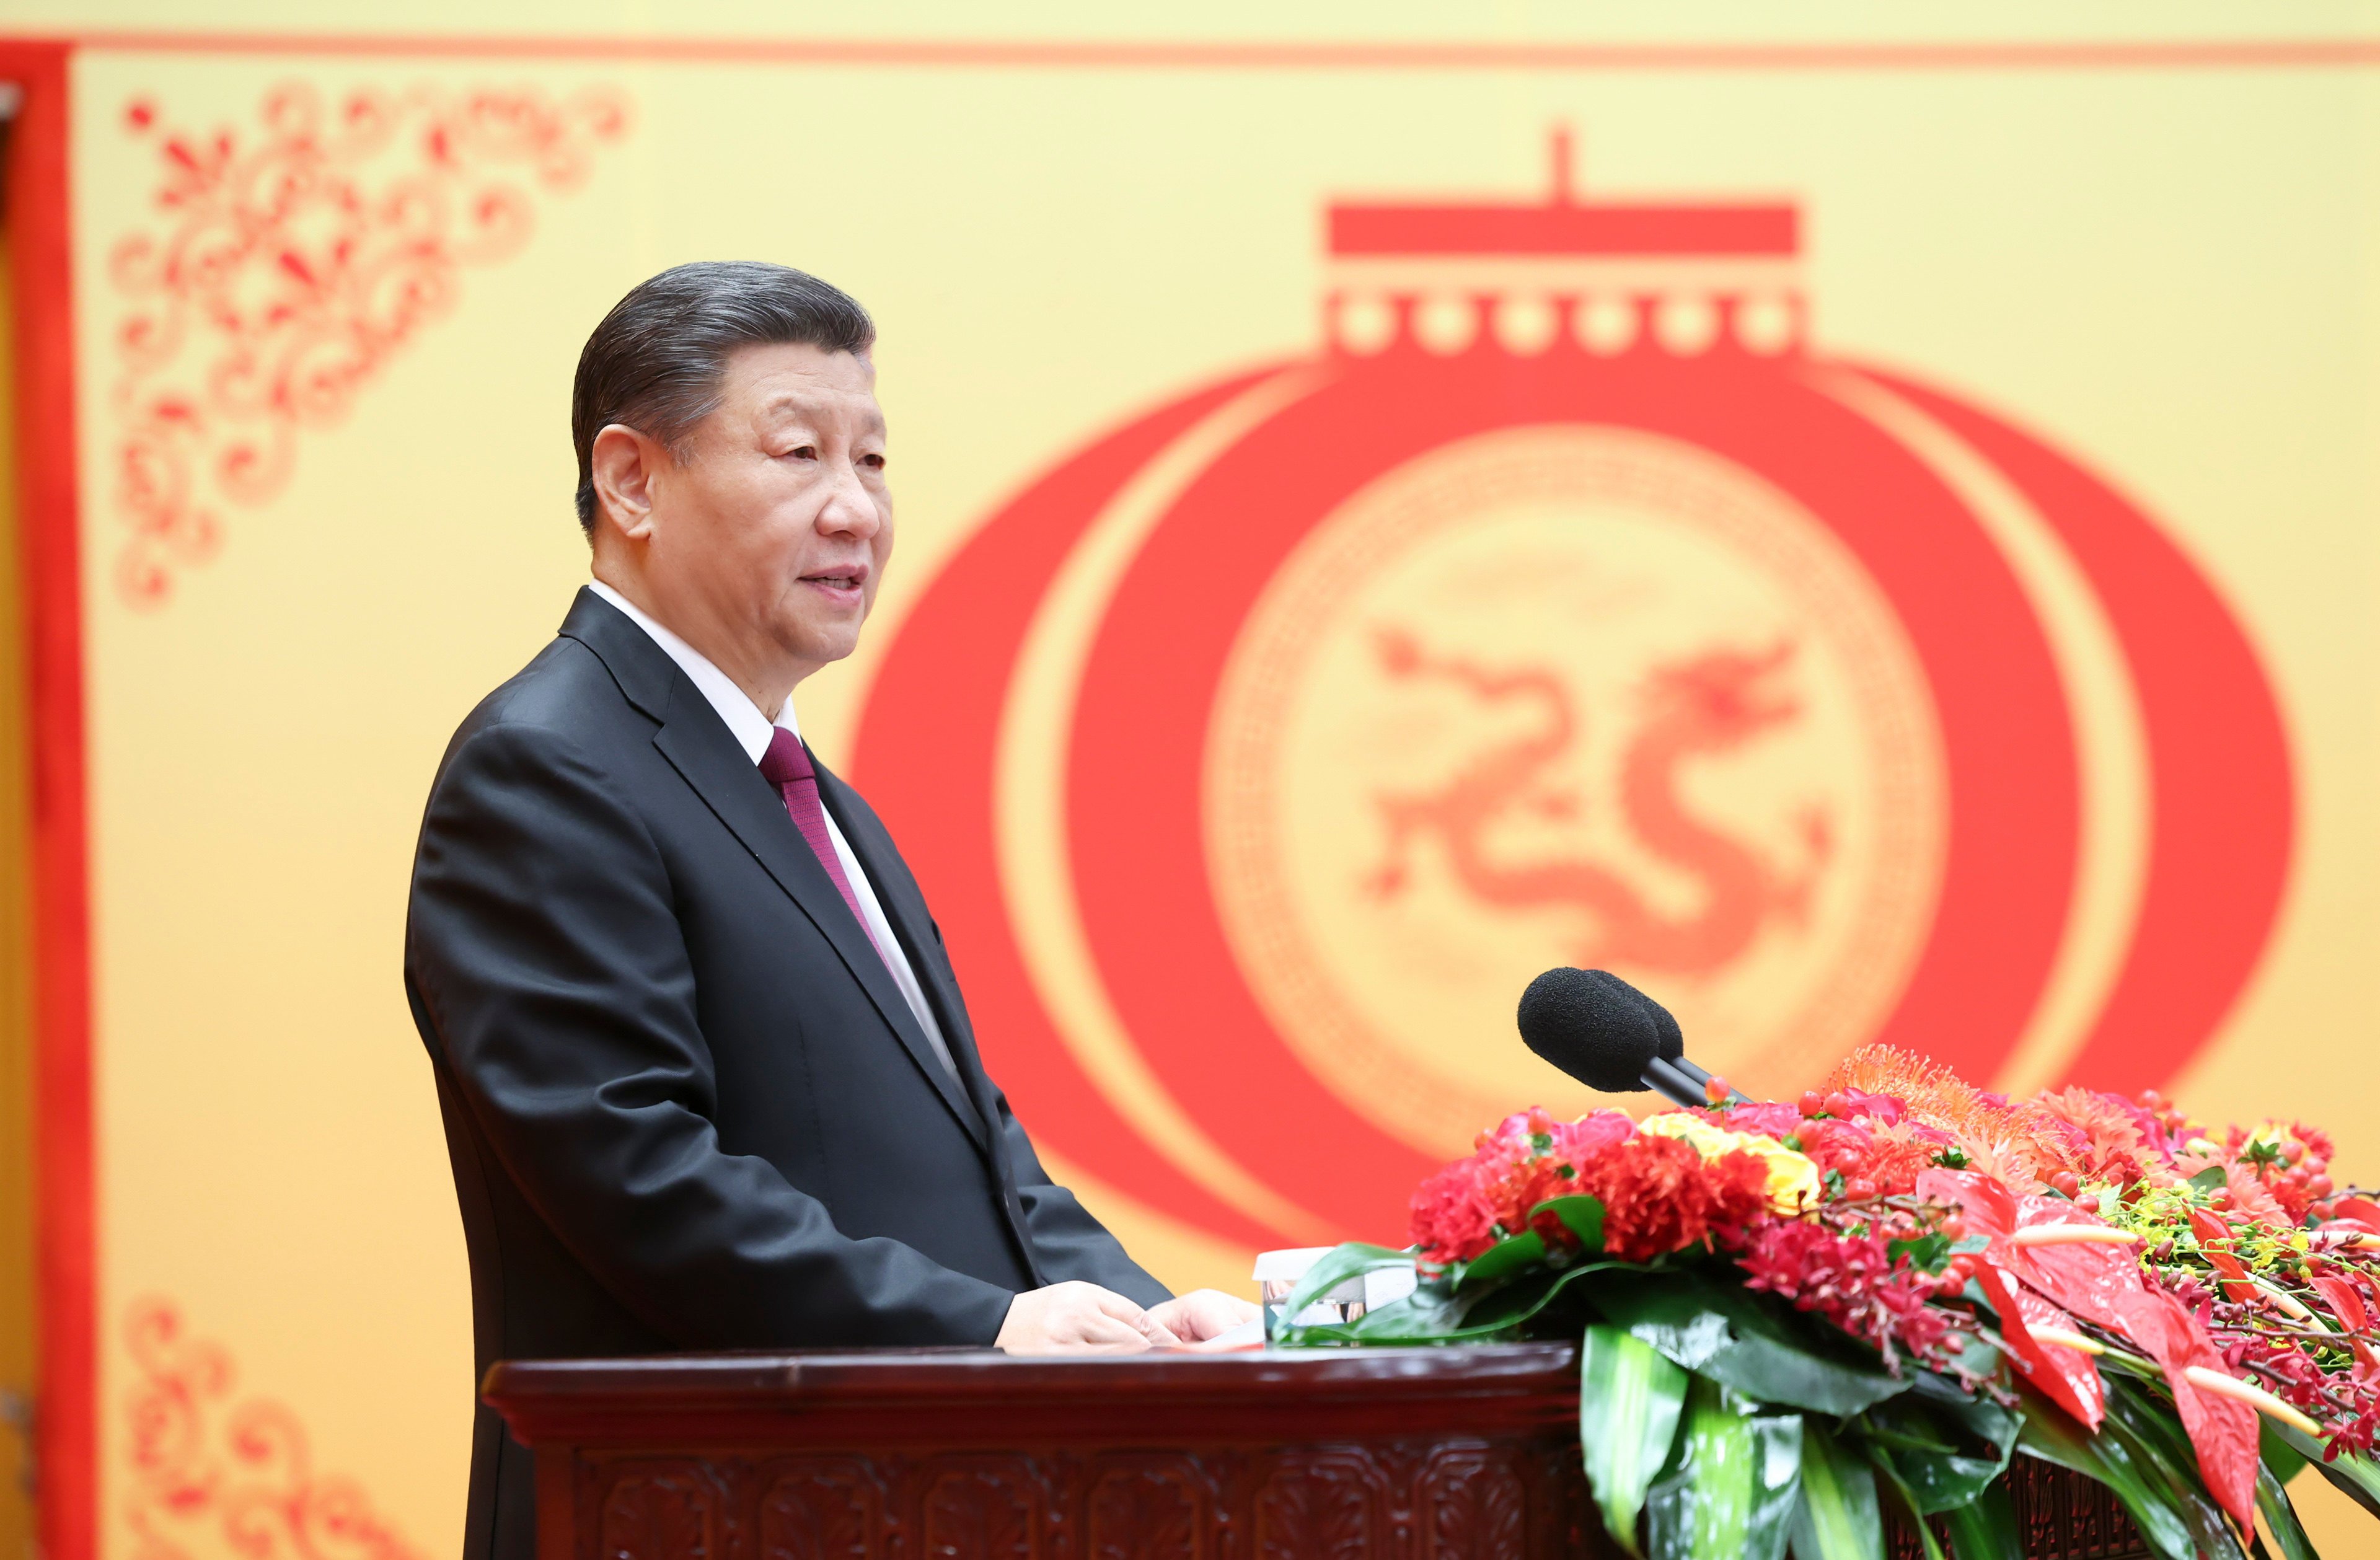 Chinese President Xi Jinping delivers a speech at a reception for Lunar New Year, also known as Spring Festival, at the Great Hall of the People in Beijing on Thursday. Photo: Xinhua